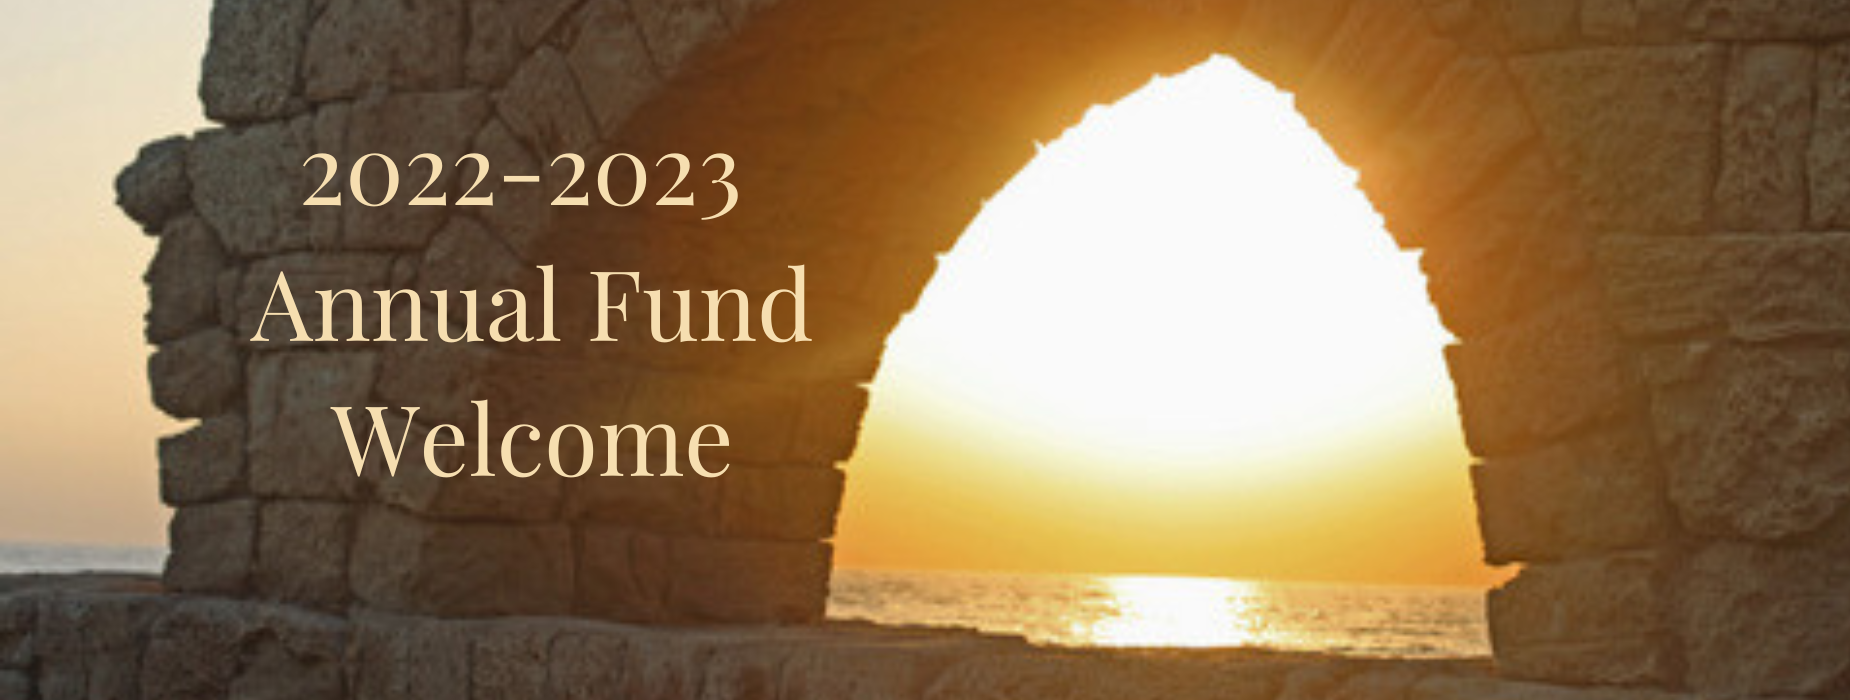 Annual Fund Welcome 22-23 (1850 × 700 px)